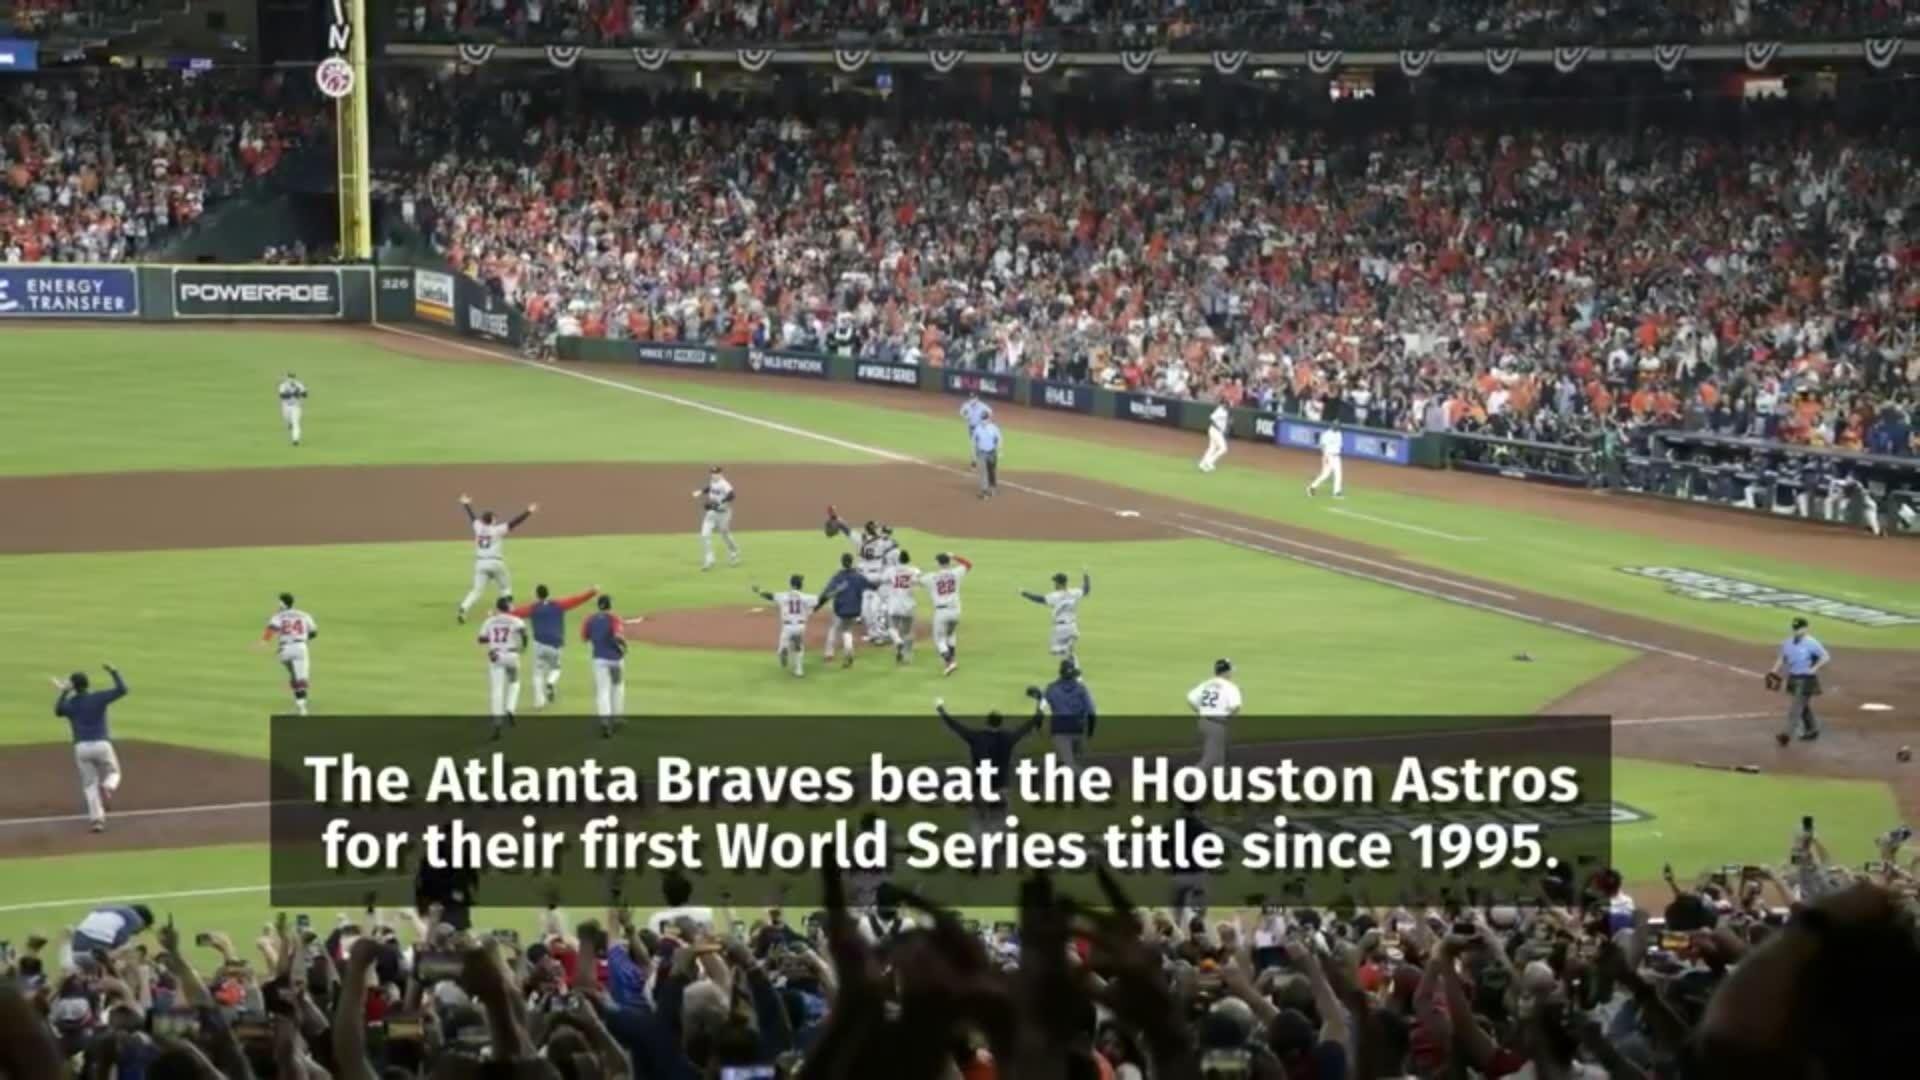 The Houston Astros Close Out The World Series As Champions - The Hilltop